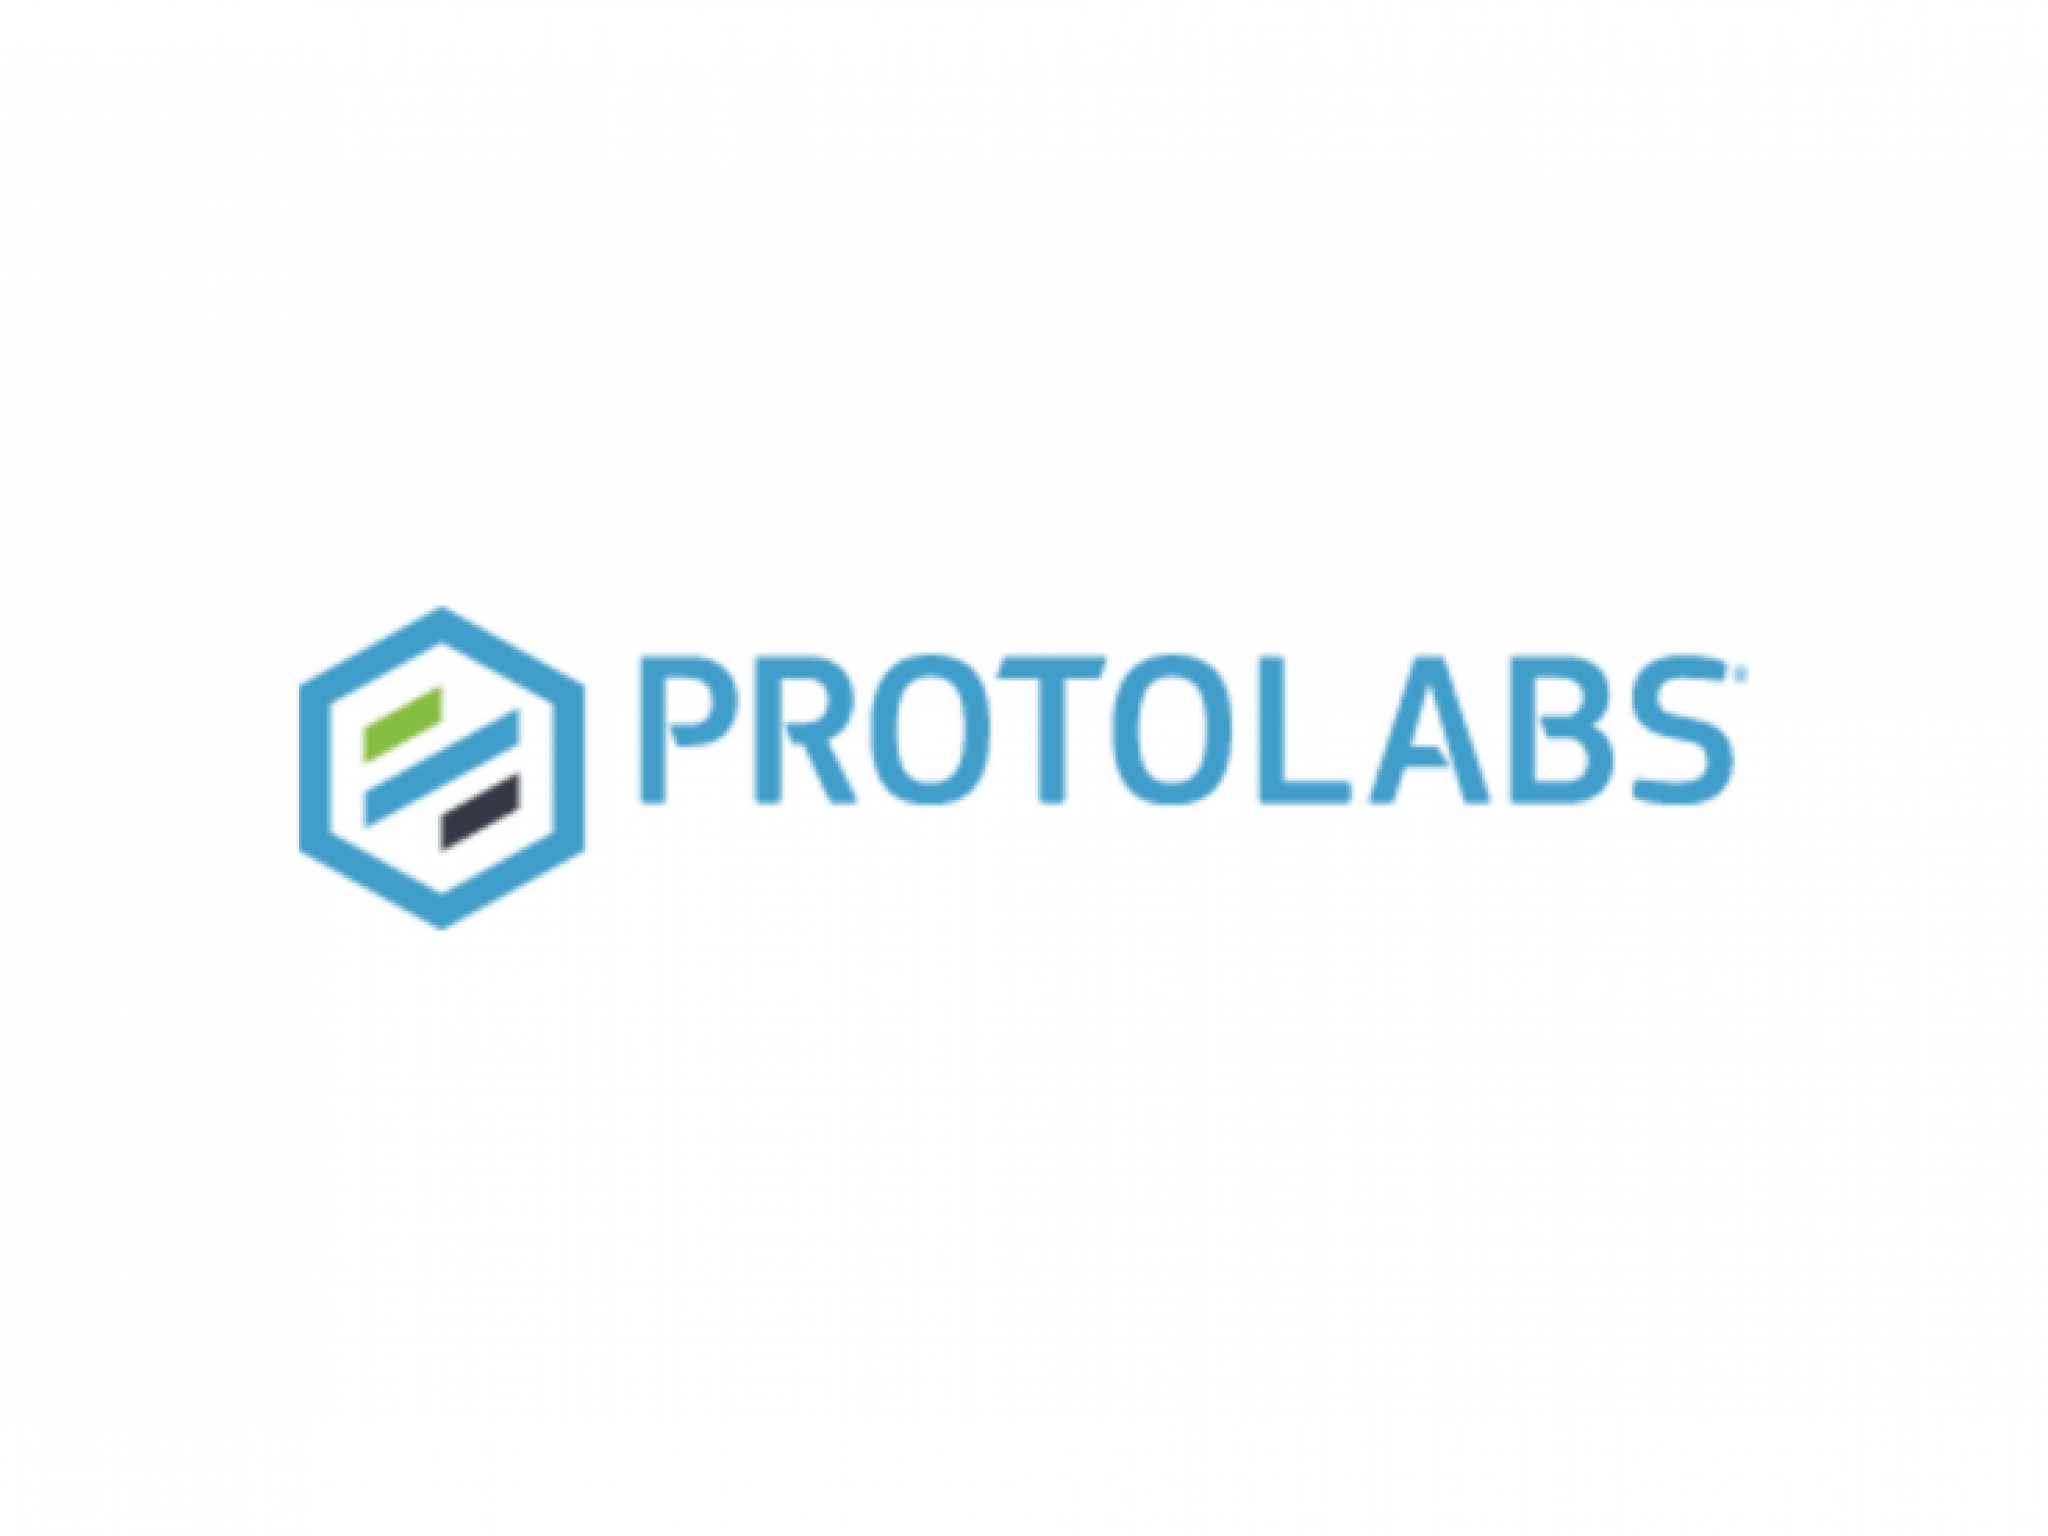  proto-labs-positioned-for-growth-analyst-predicts-strong-gains-amid-digital-manufacturing-surge 